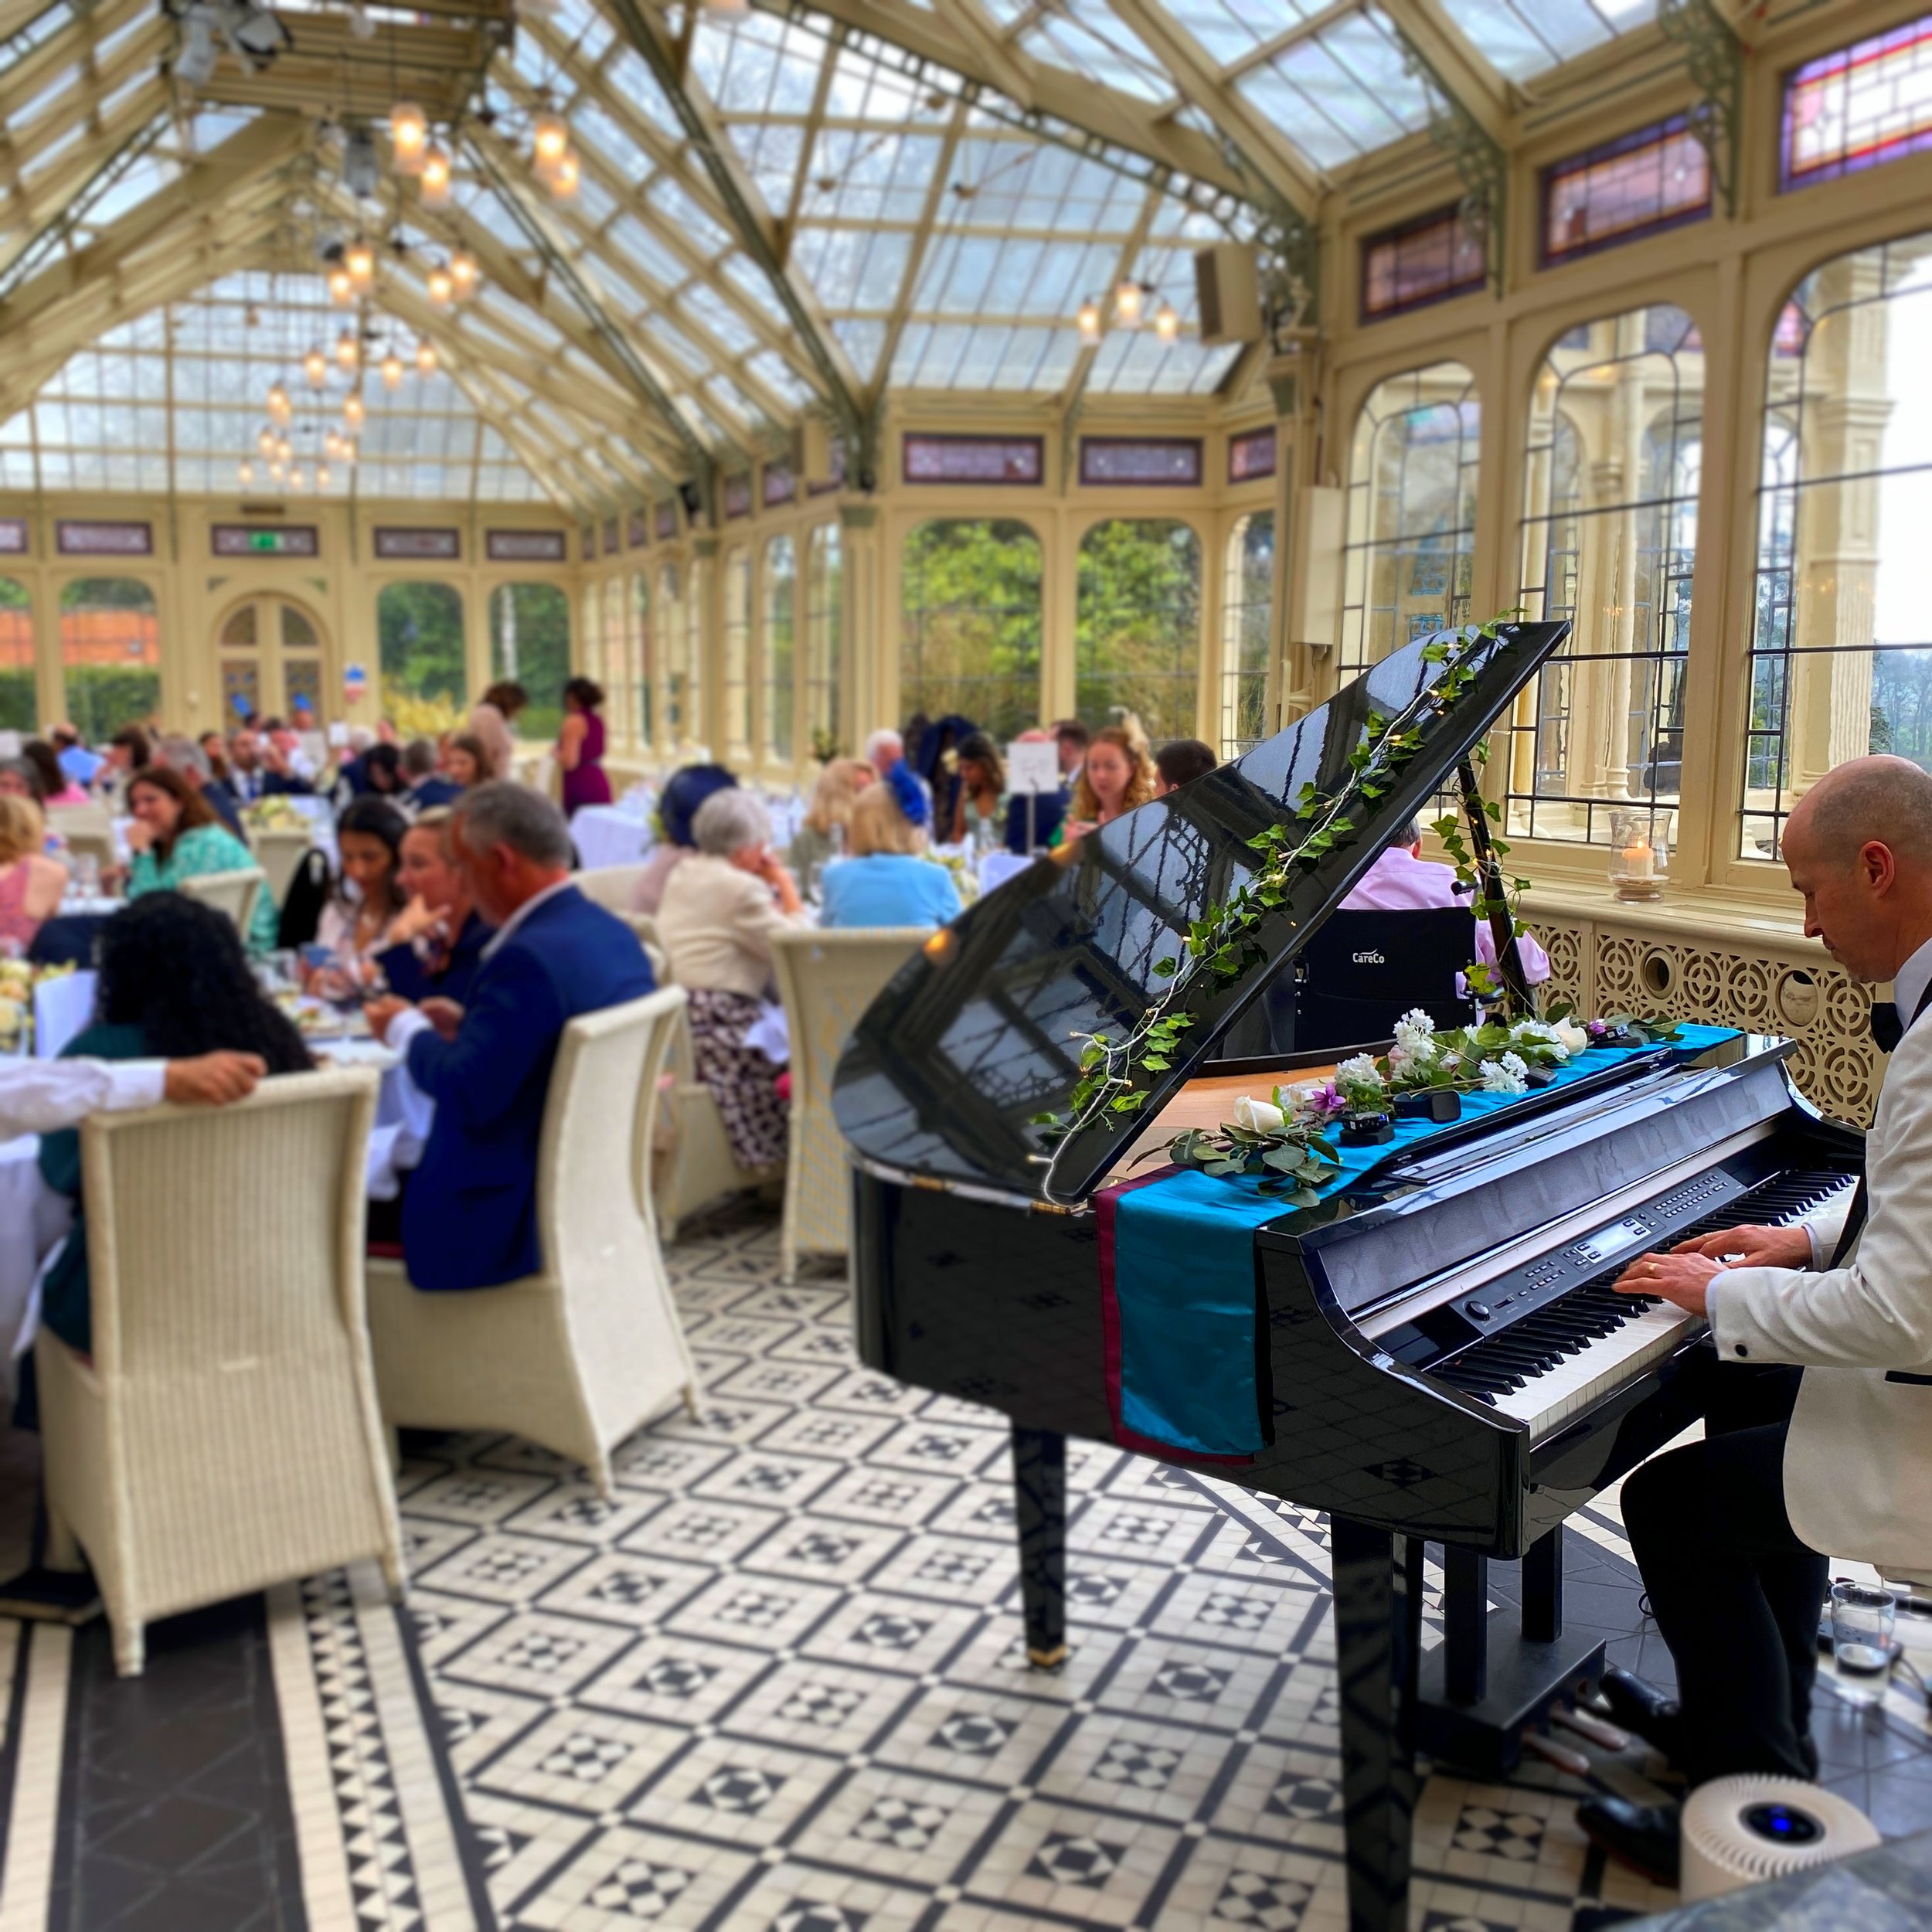 Performing on the baby grand at Kilworth House